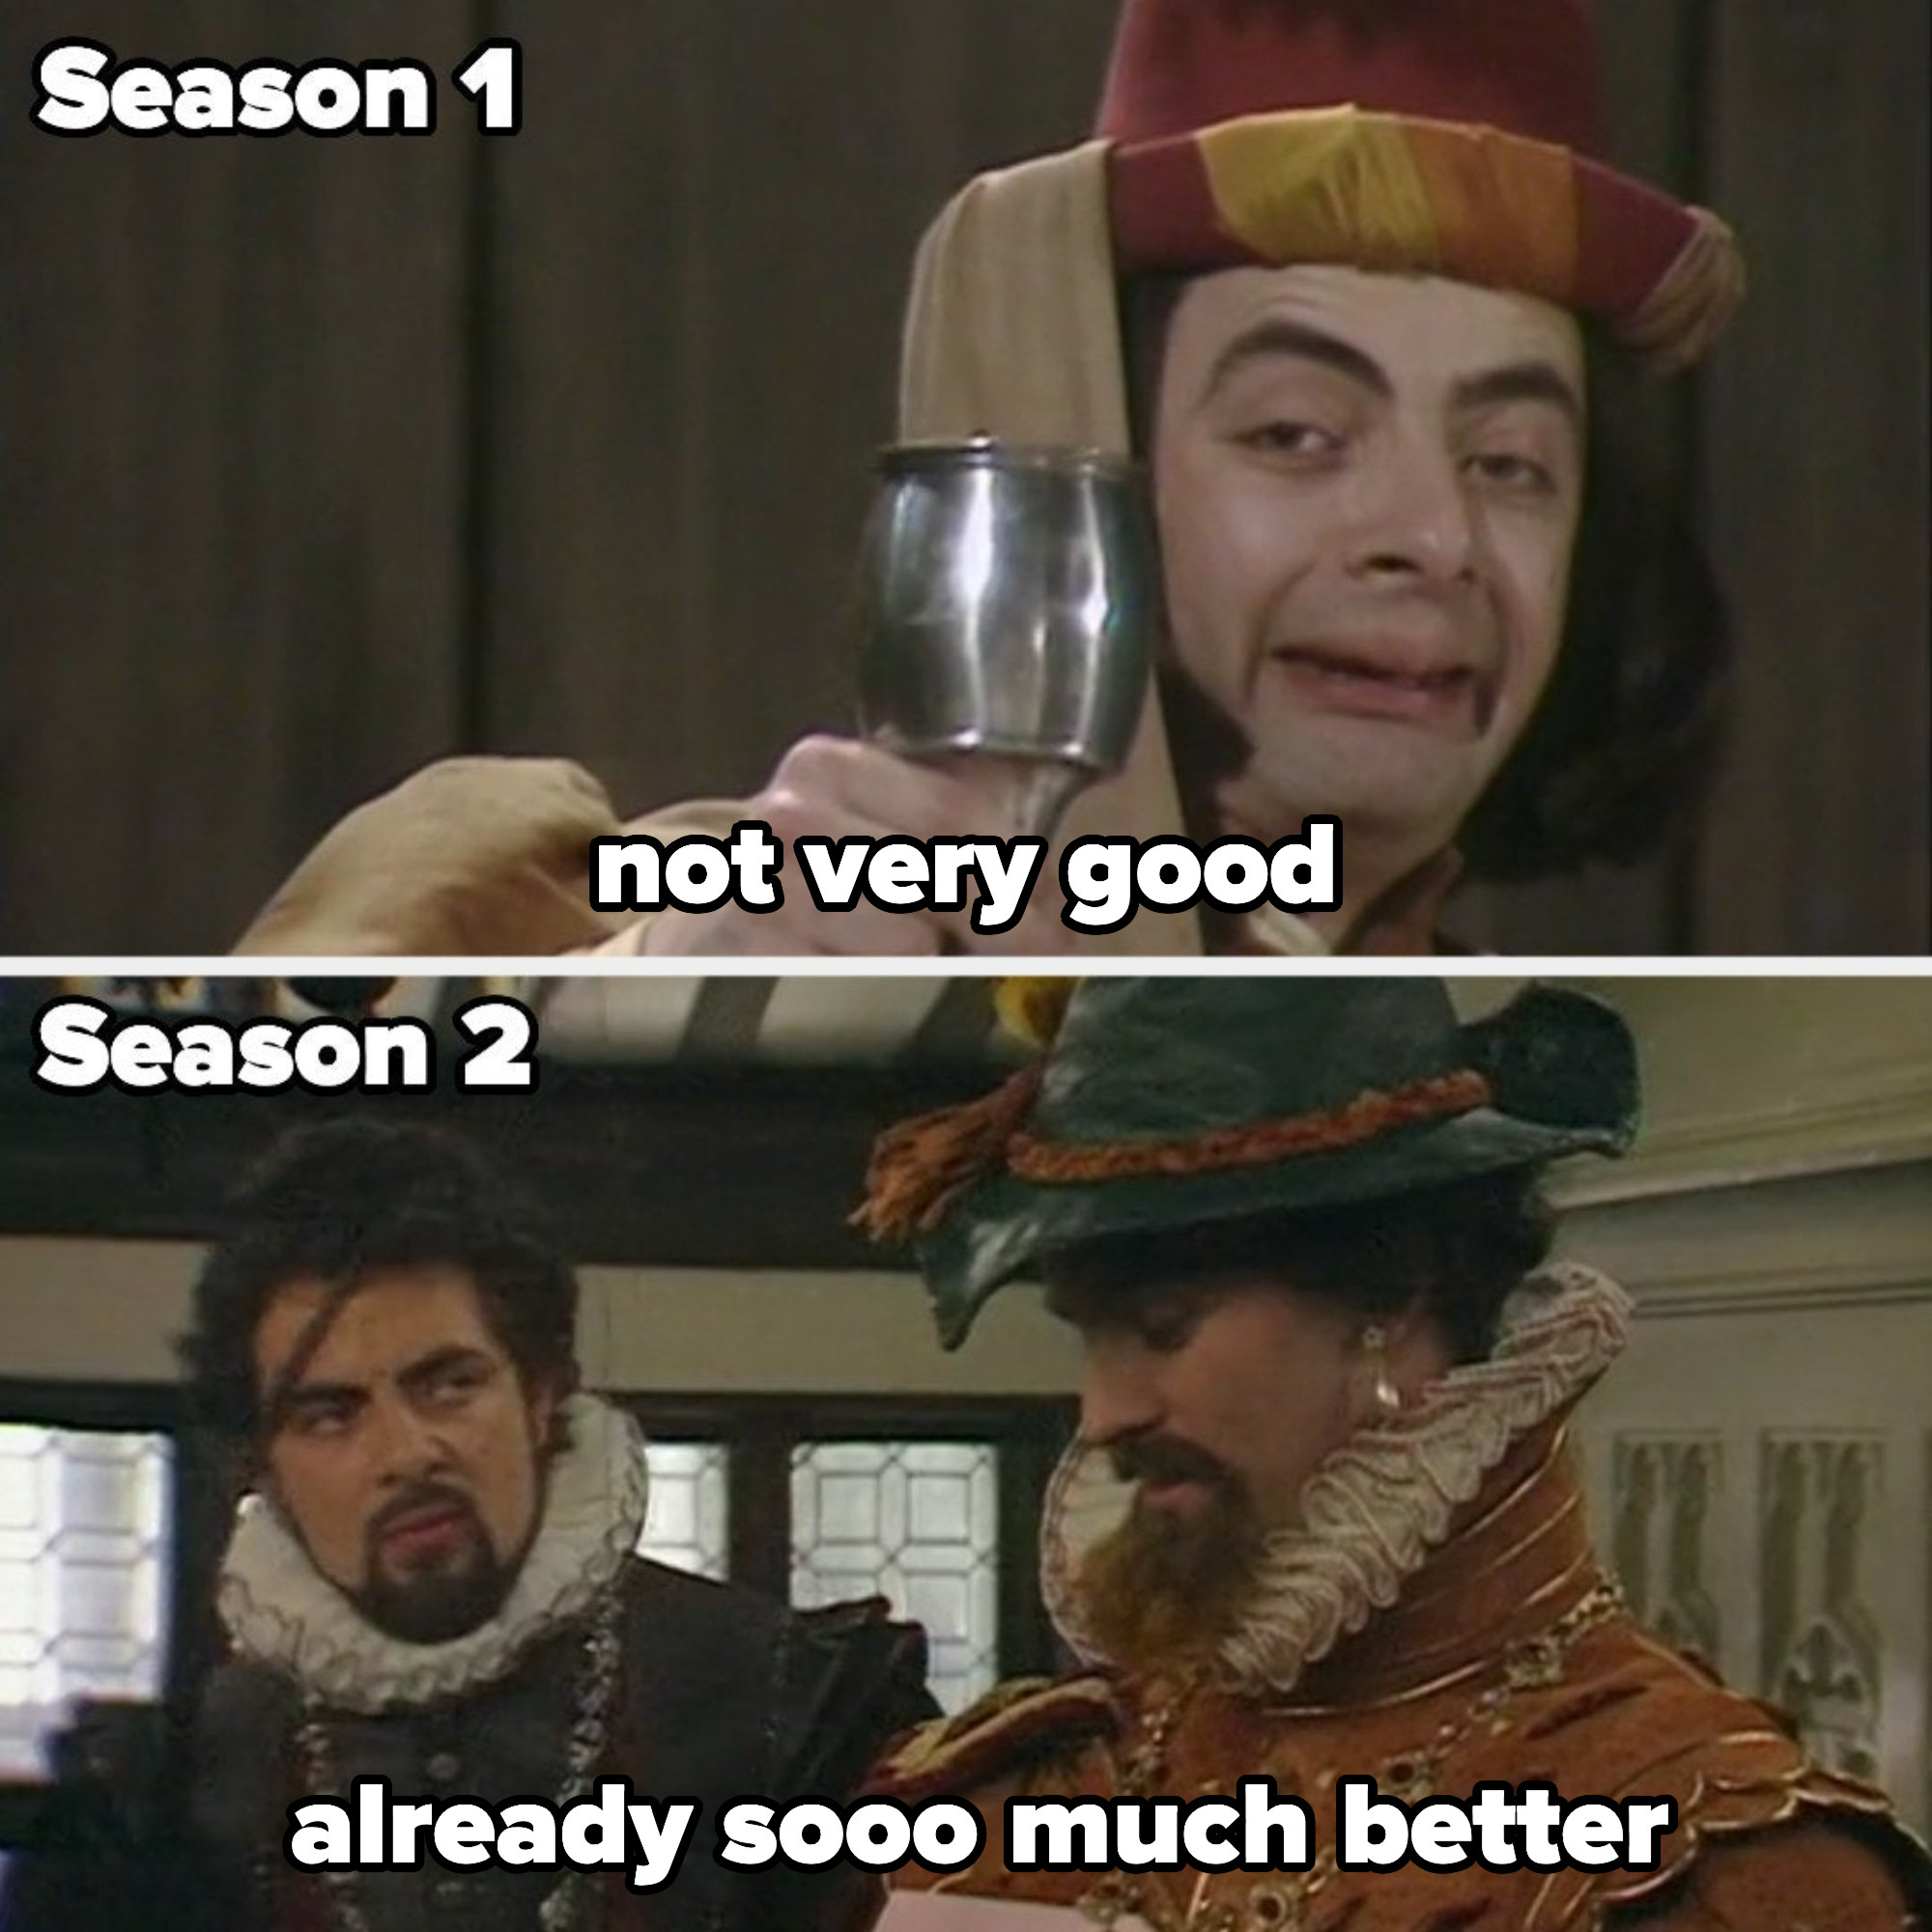 season 1 labeled &quot;not very good&quot; and season labeled &quot;already sooo much better&quot;